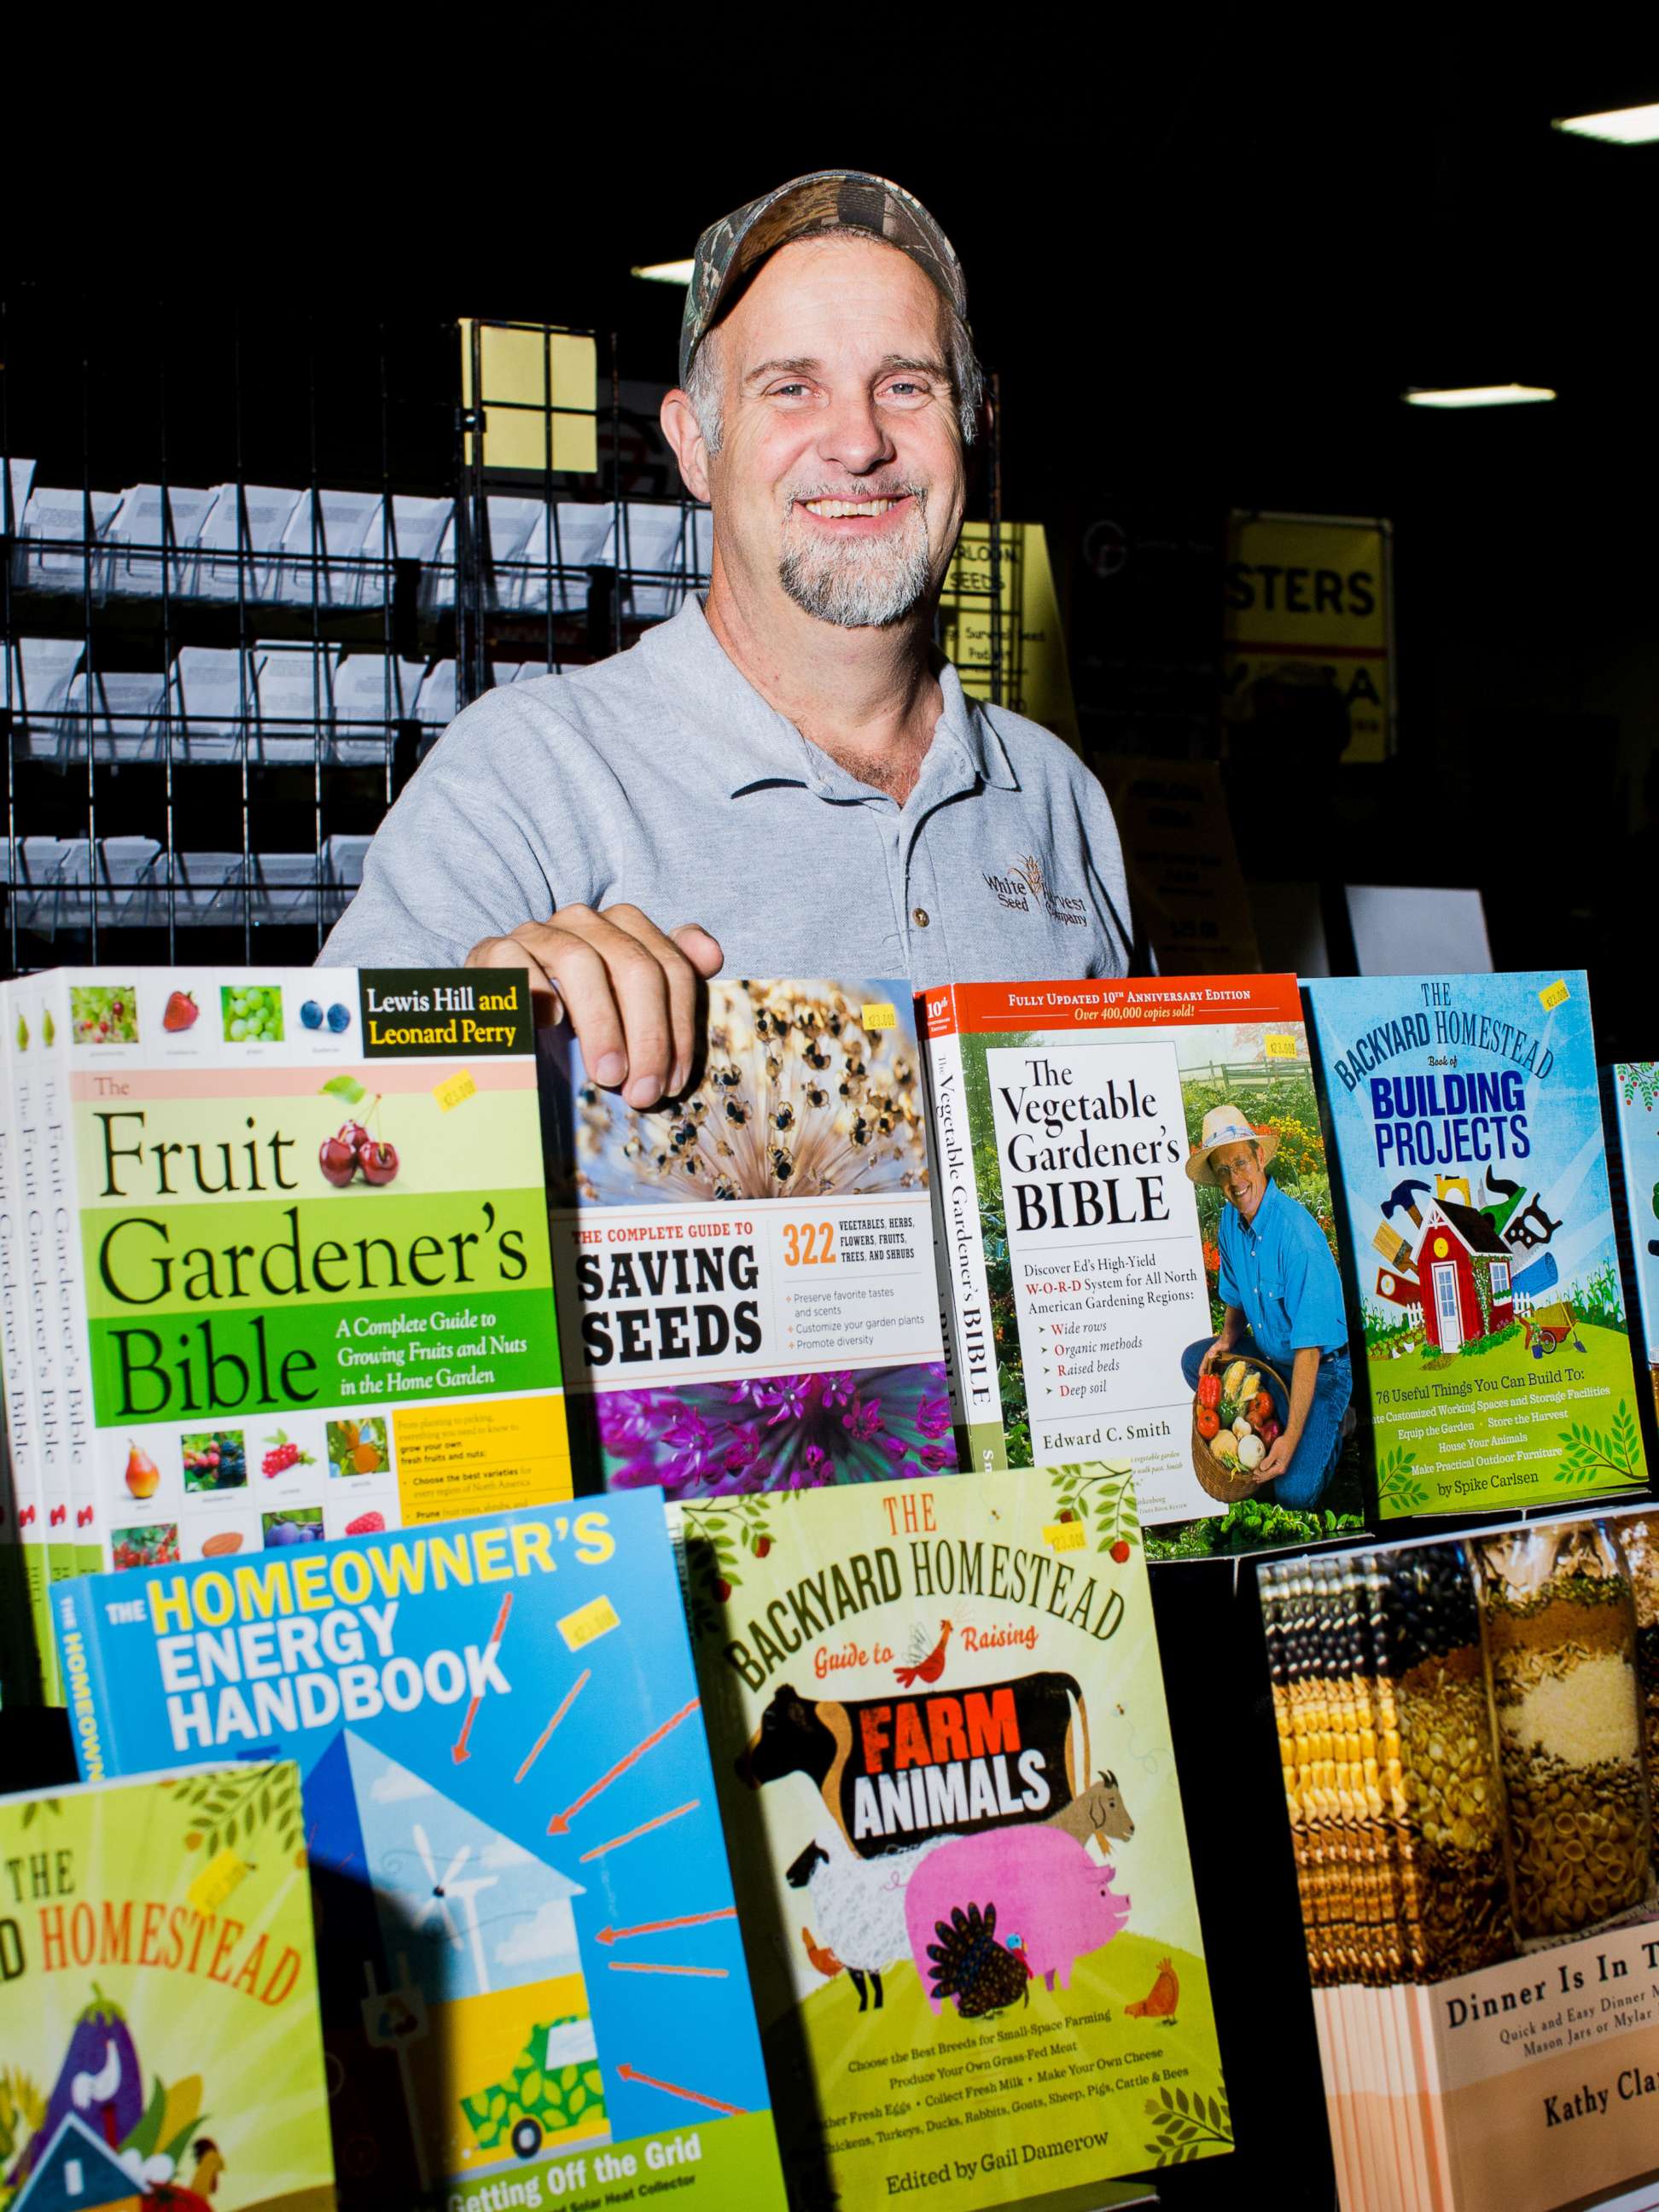 PHOTO: Mike Nocks stands behind a collection of books on display.